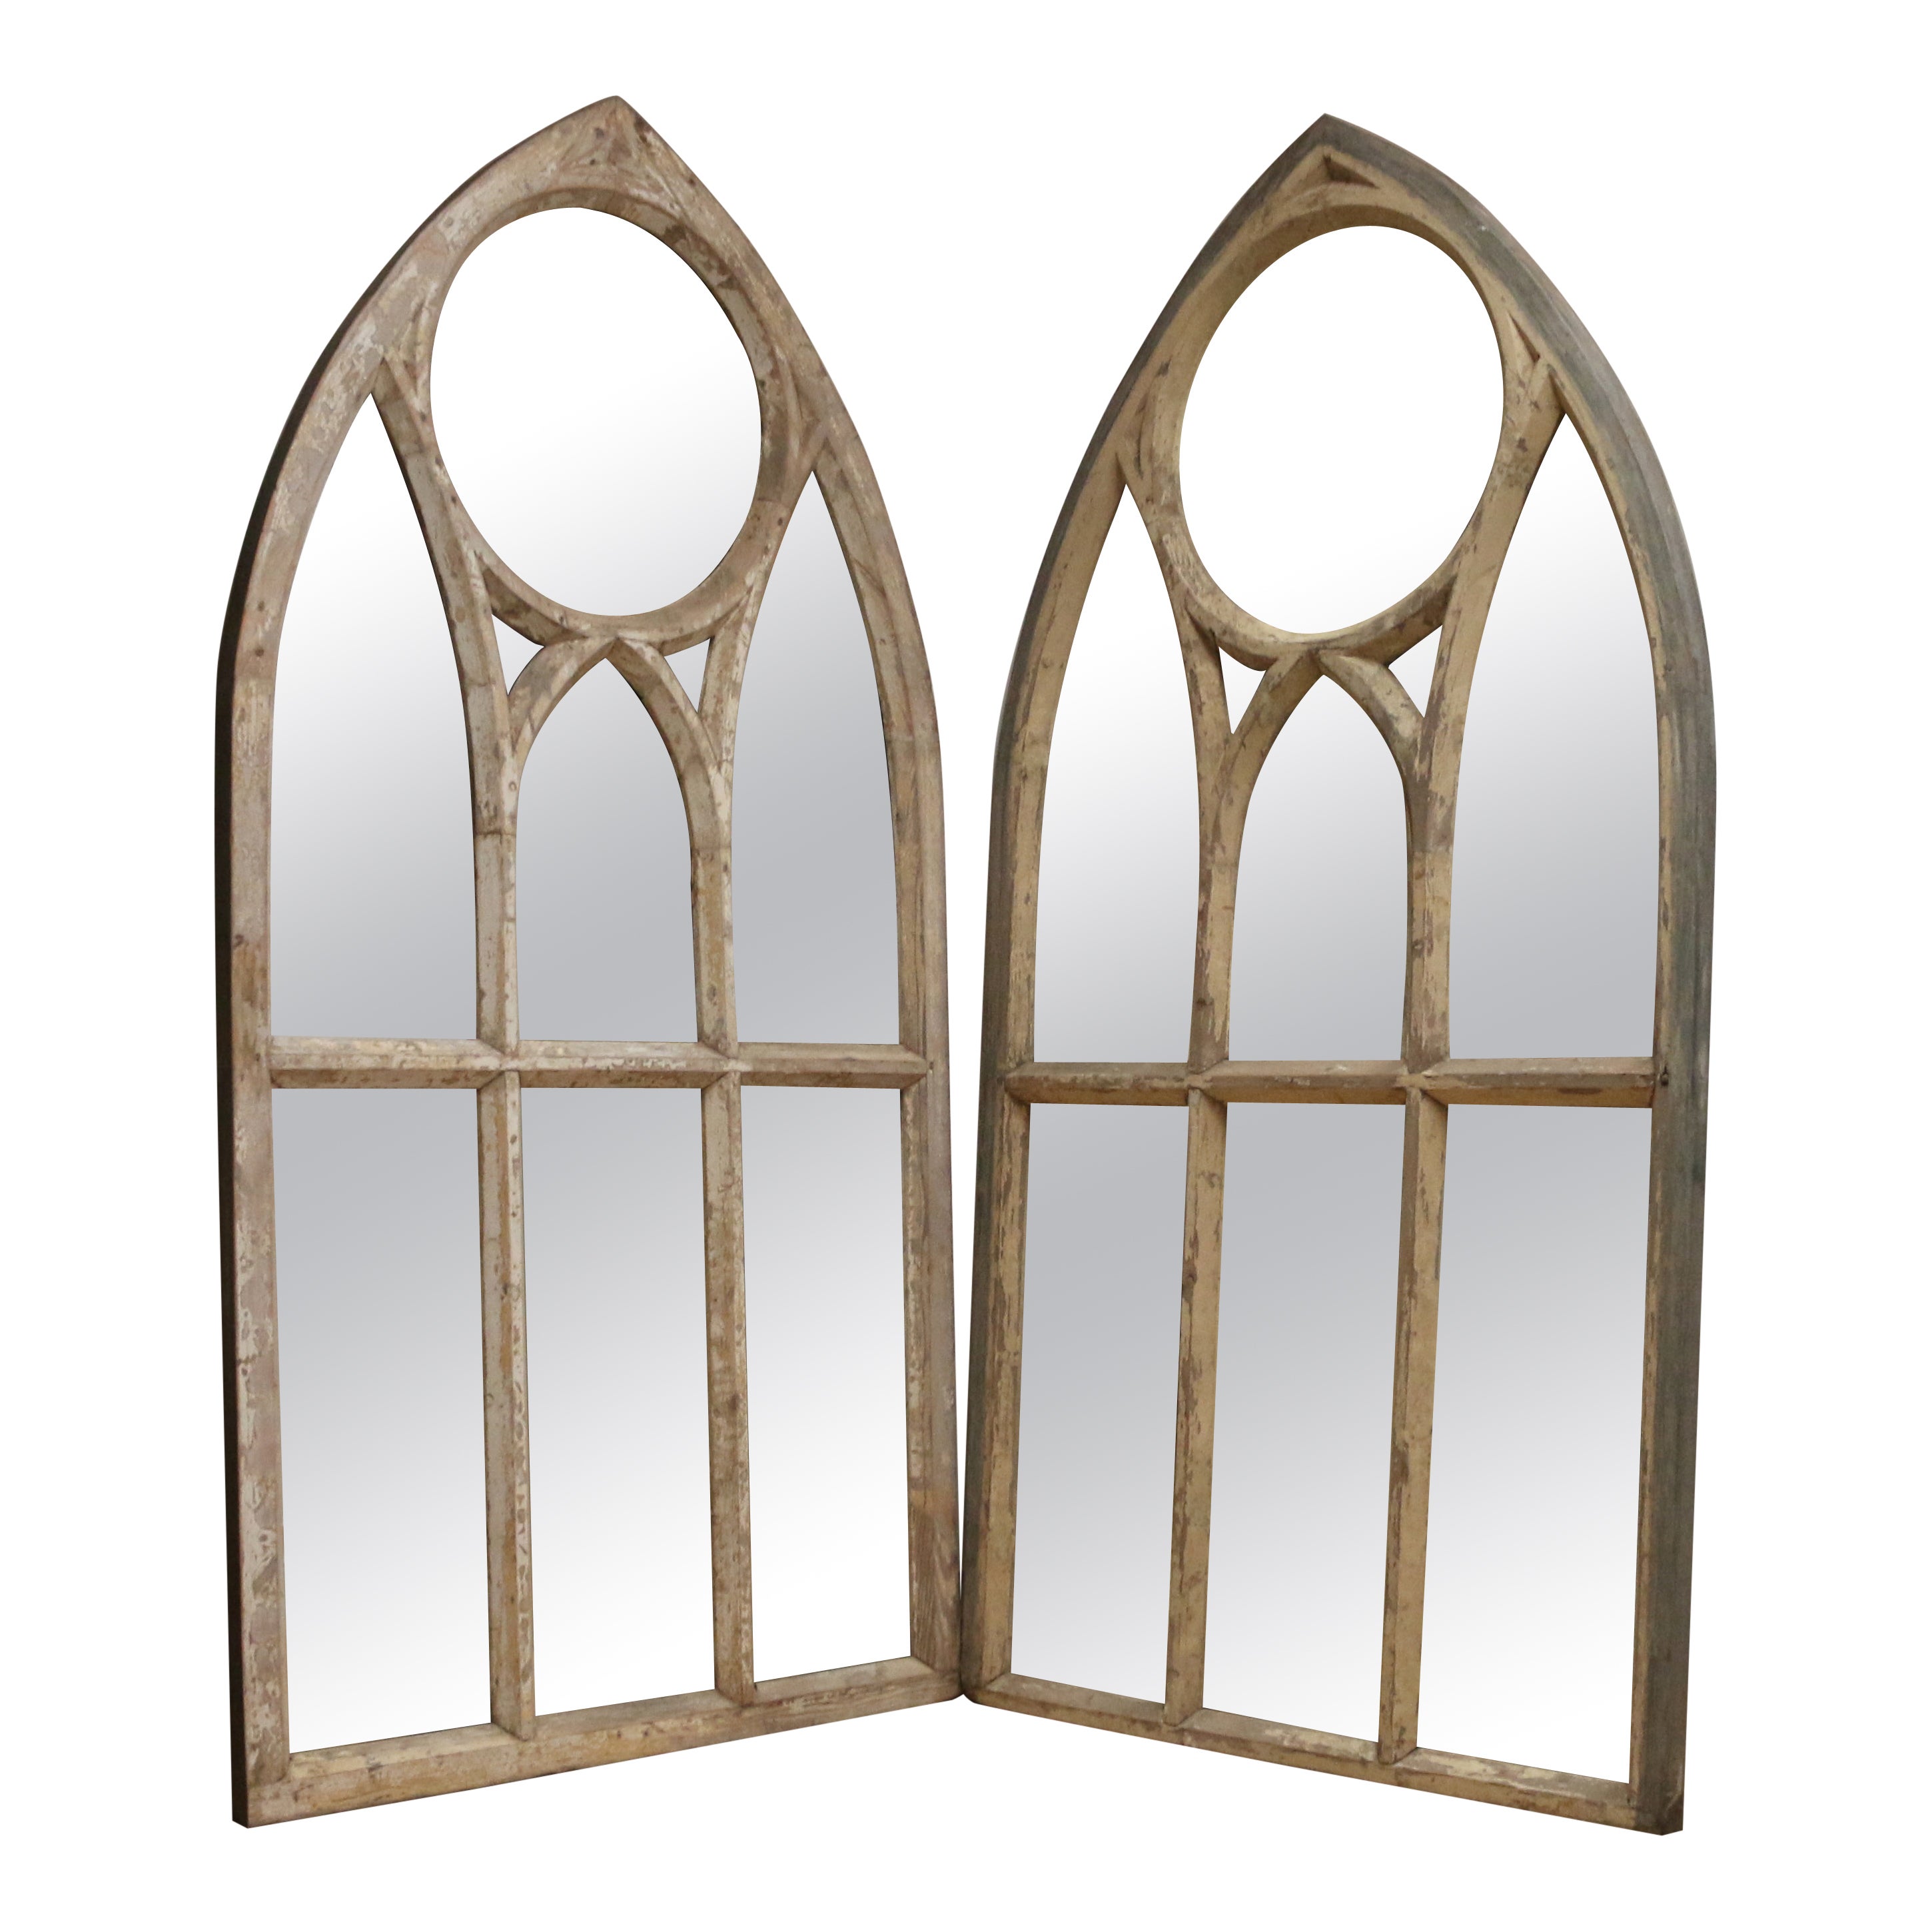 Huge Gothic Arched Window Mirrors